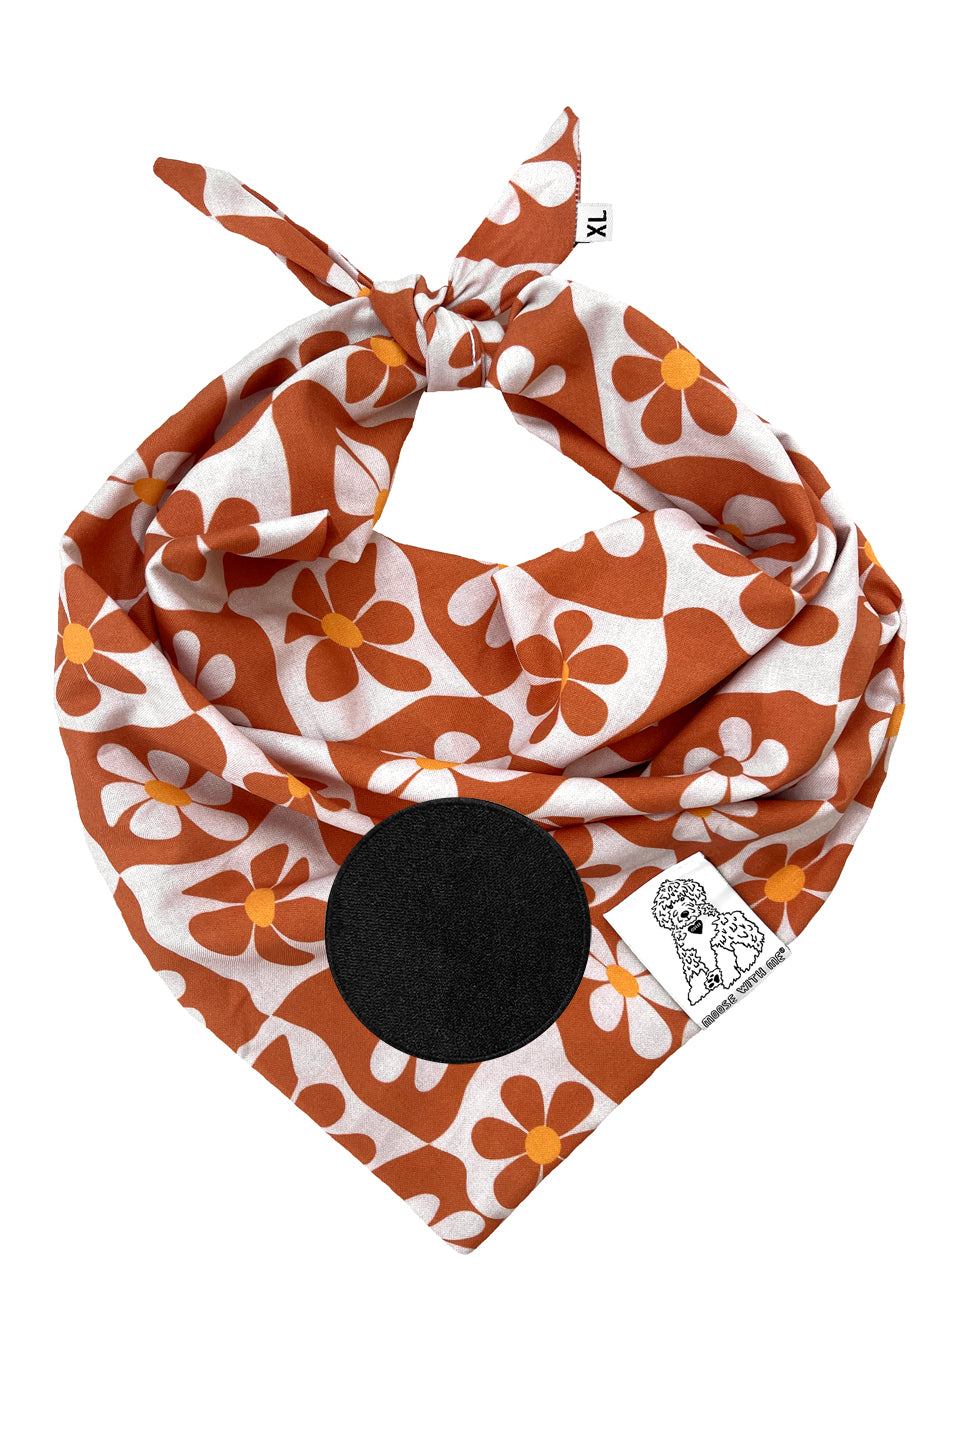 Dog Bandana Groovy Daisy - Customize with Interchangeable Velcro Patches